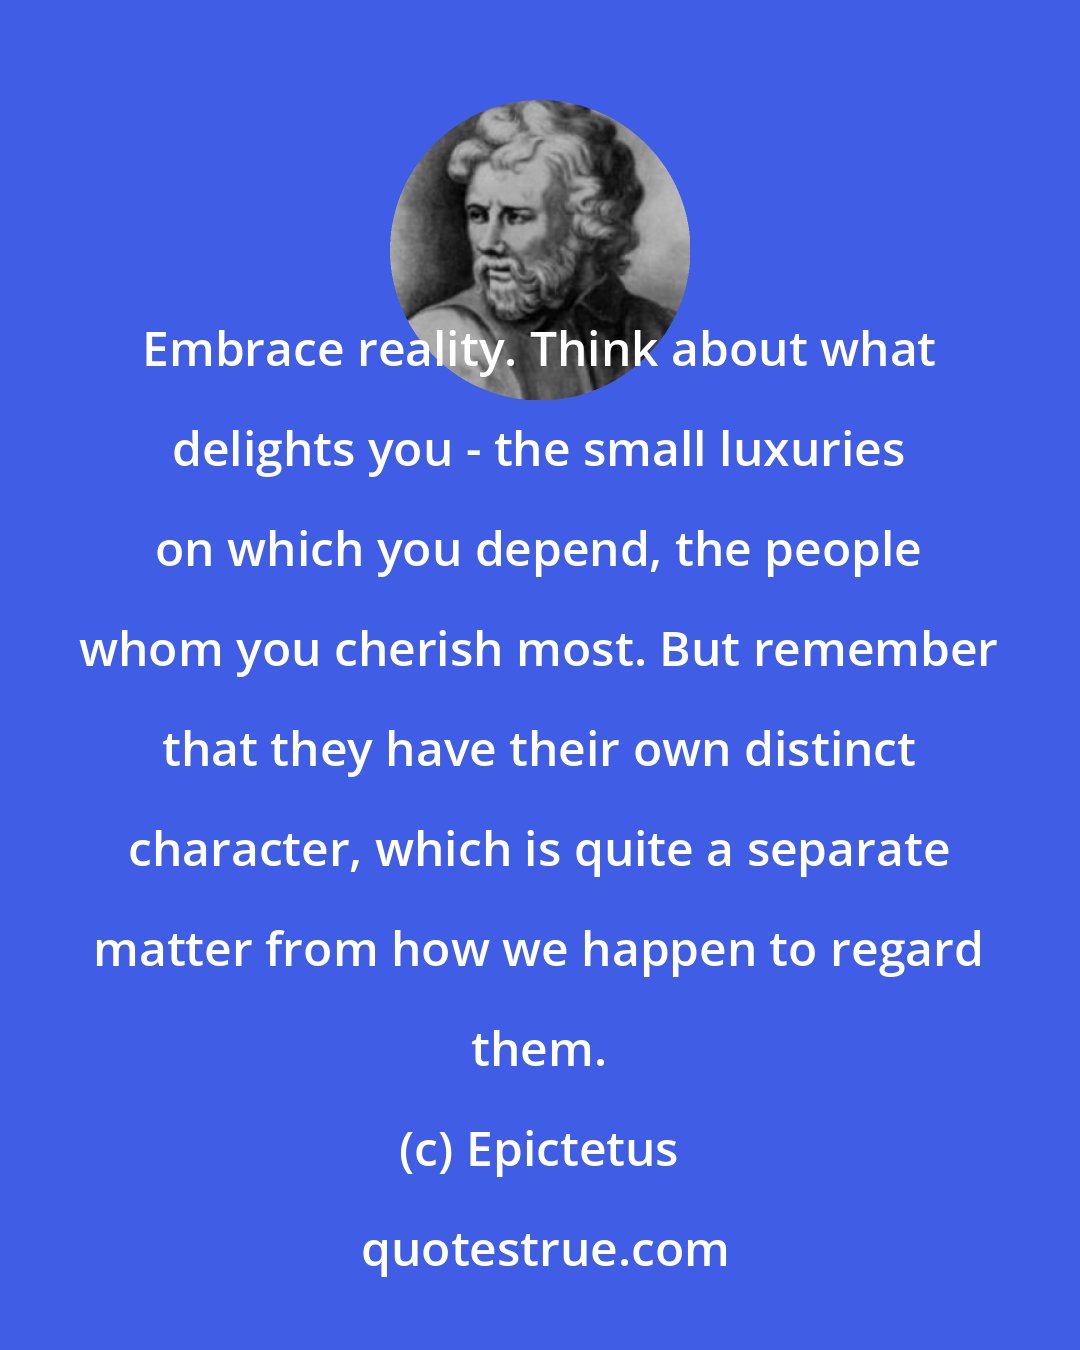 Epictetus: Embrace reality. Think about what delights you - the small luxuries on which you depend, the people whom you cherish most. But remember that they have their own distinct character, which is quite a separate matter from how we happen to regard them.